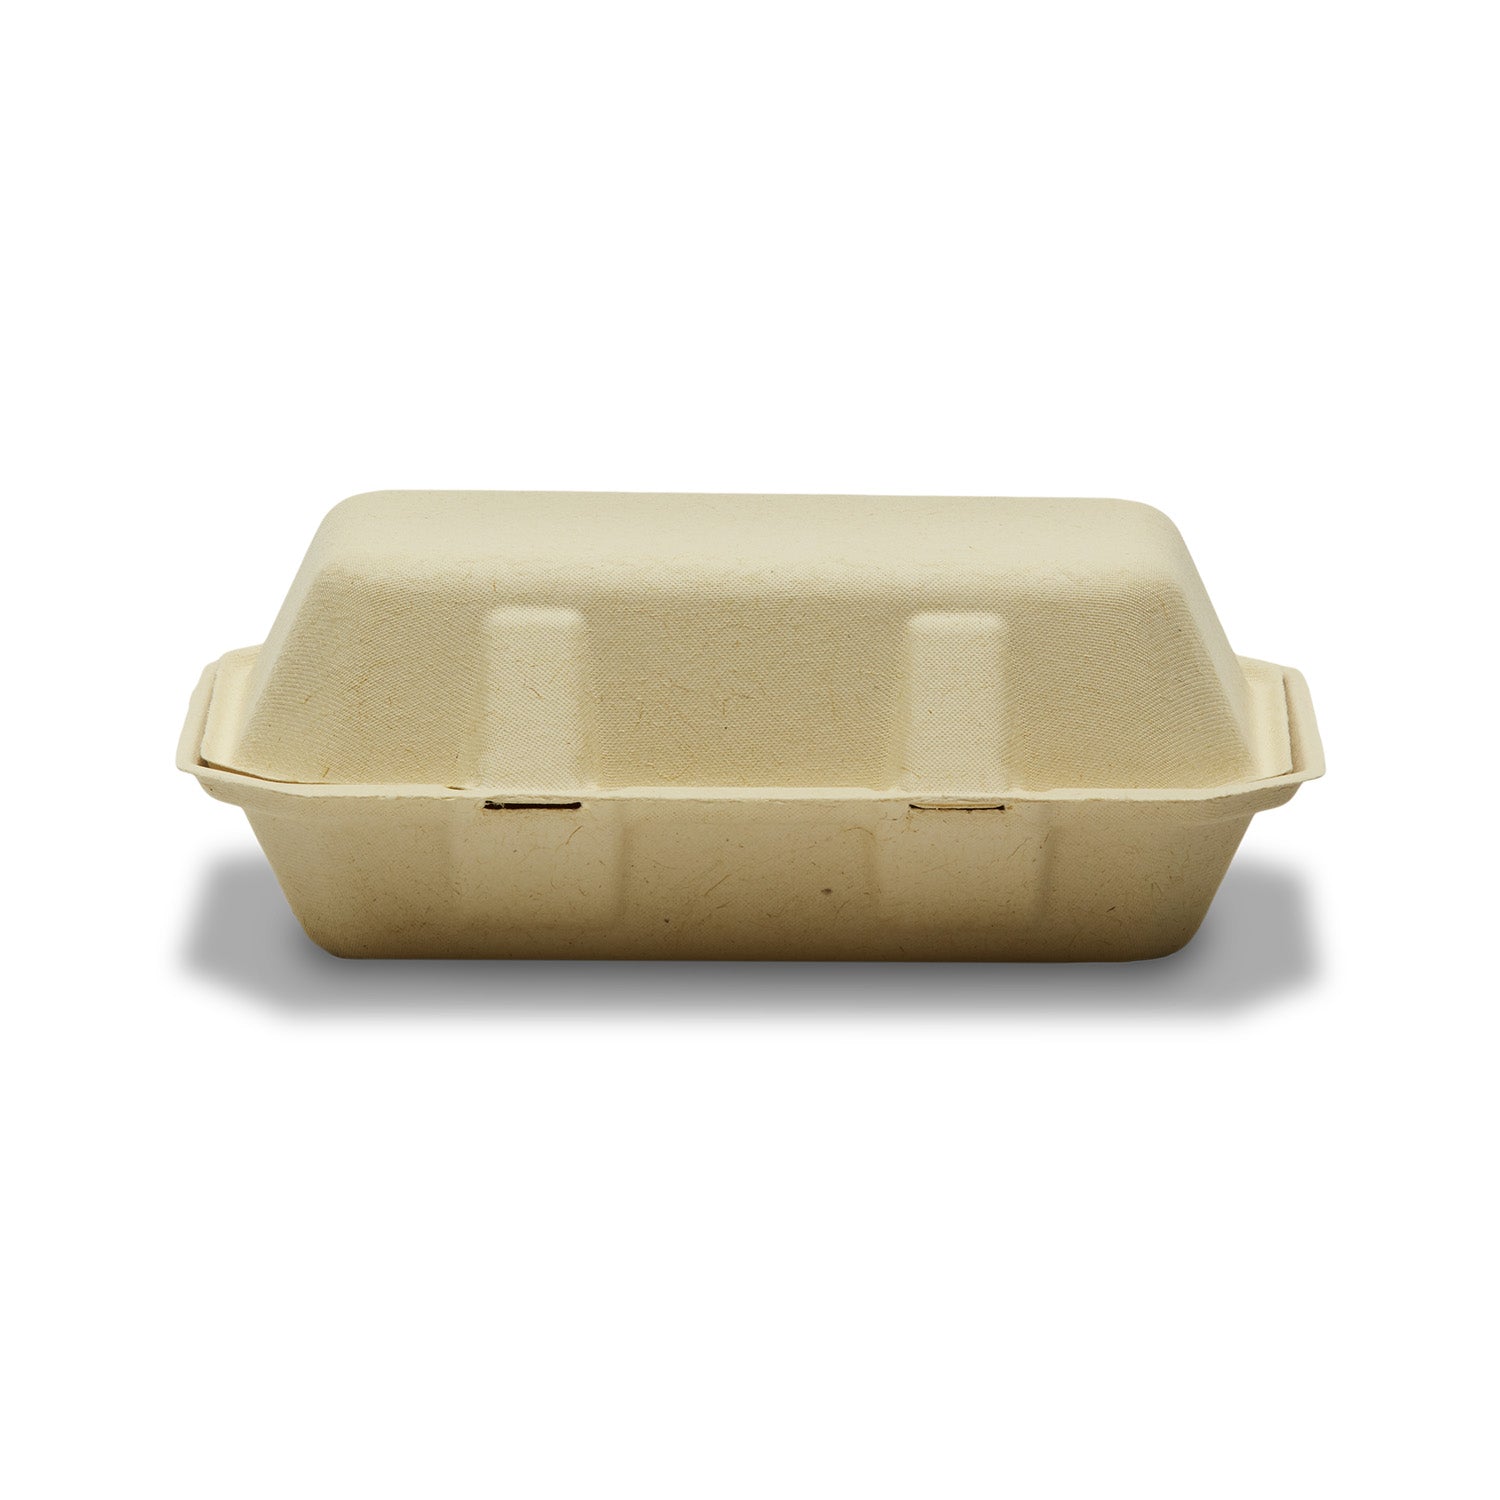 100% Compostable Bagasse Clam Shell To-Go Containers – ABENA USA